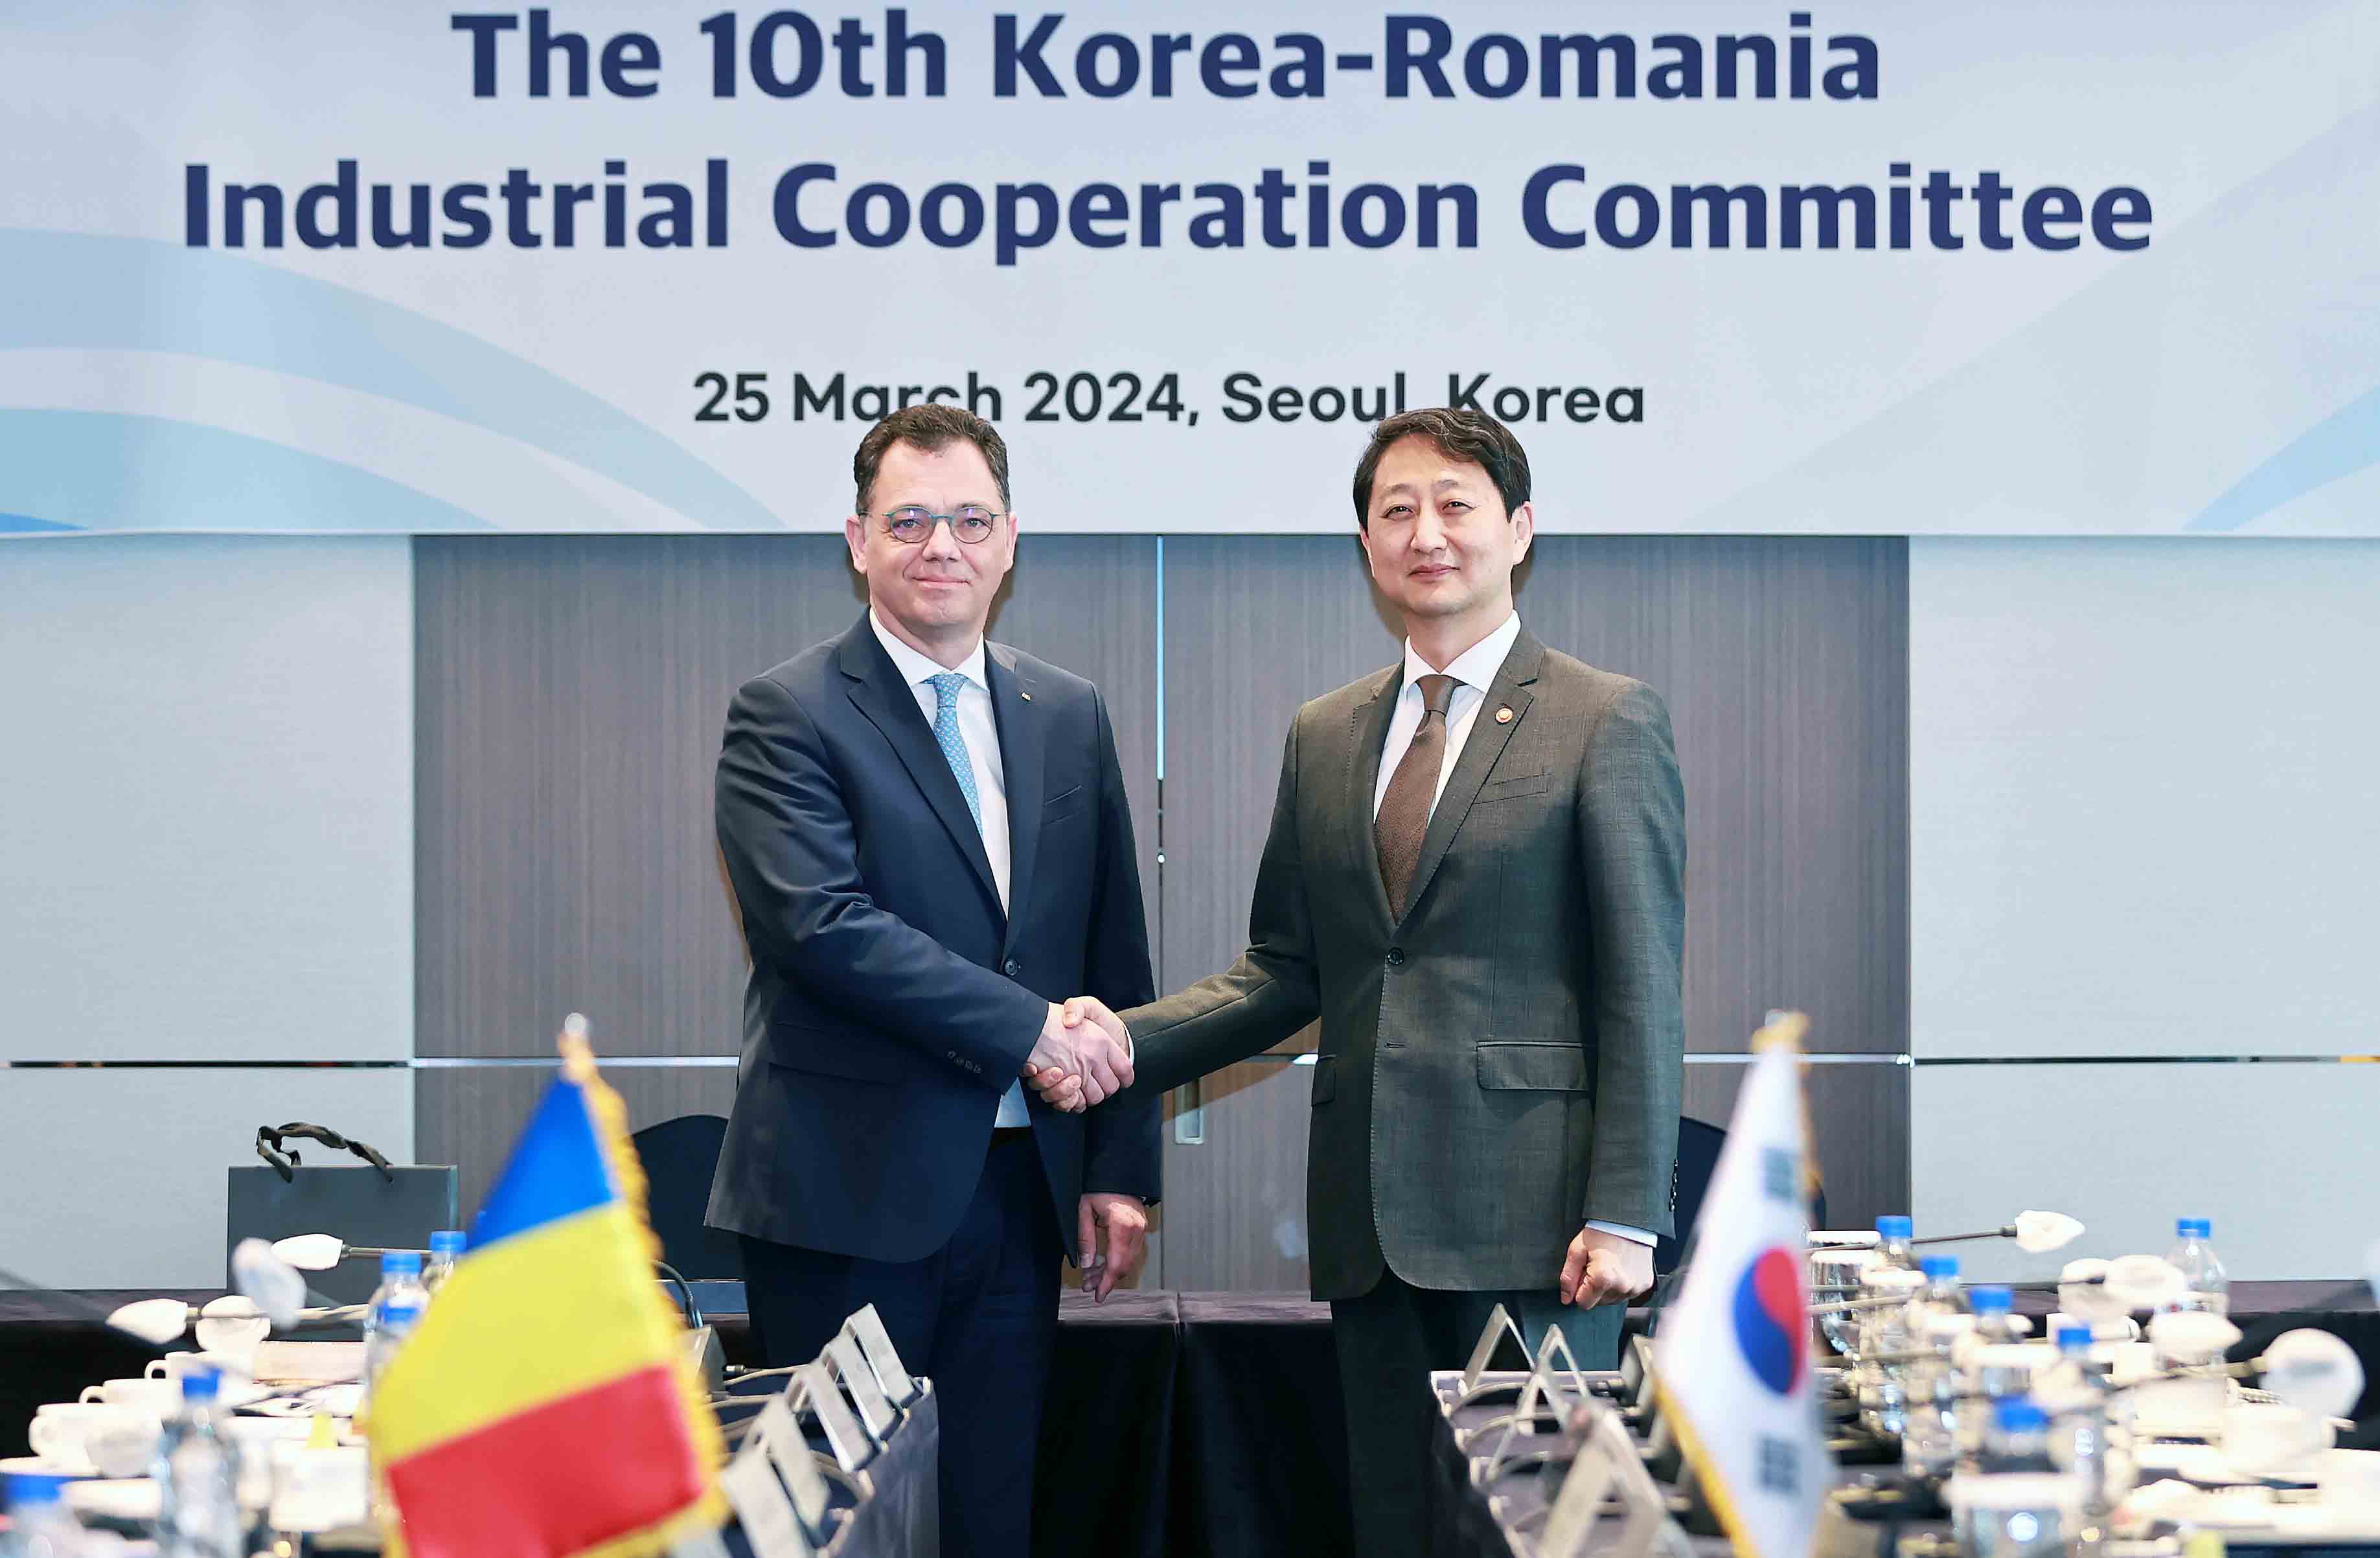 Korea and Romania hold 10th Industrial Cooperation Committee Meeting